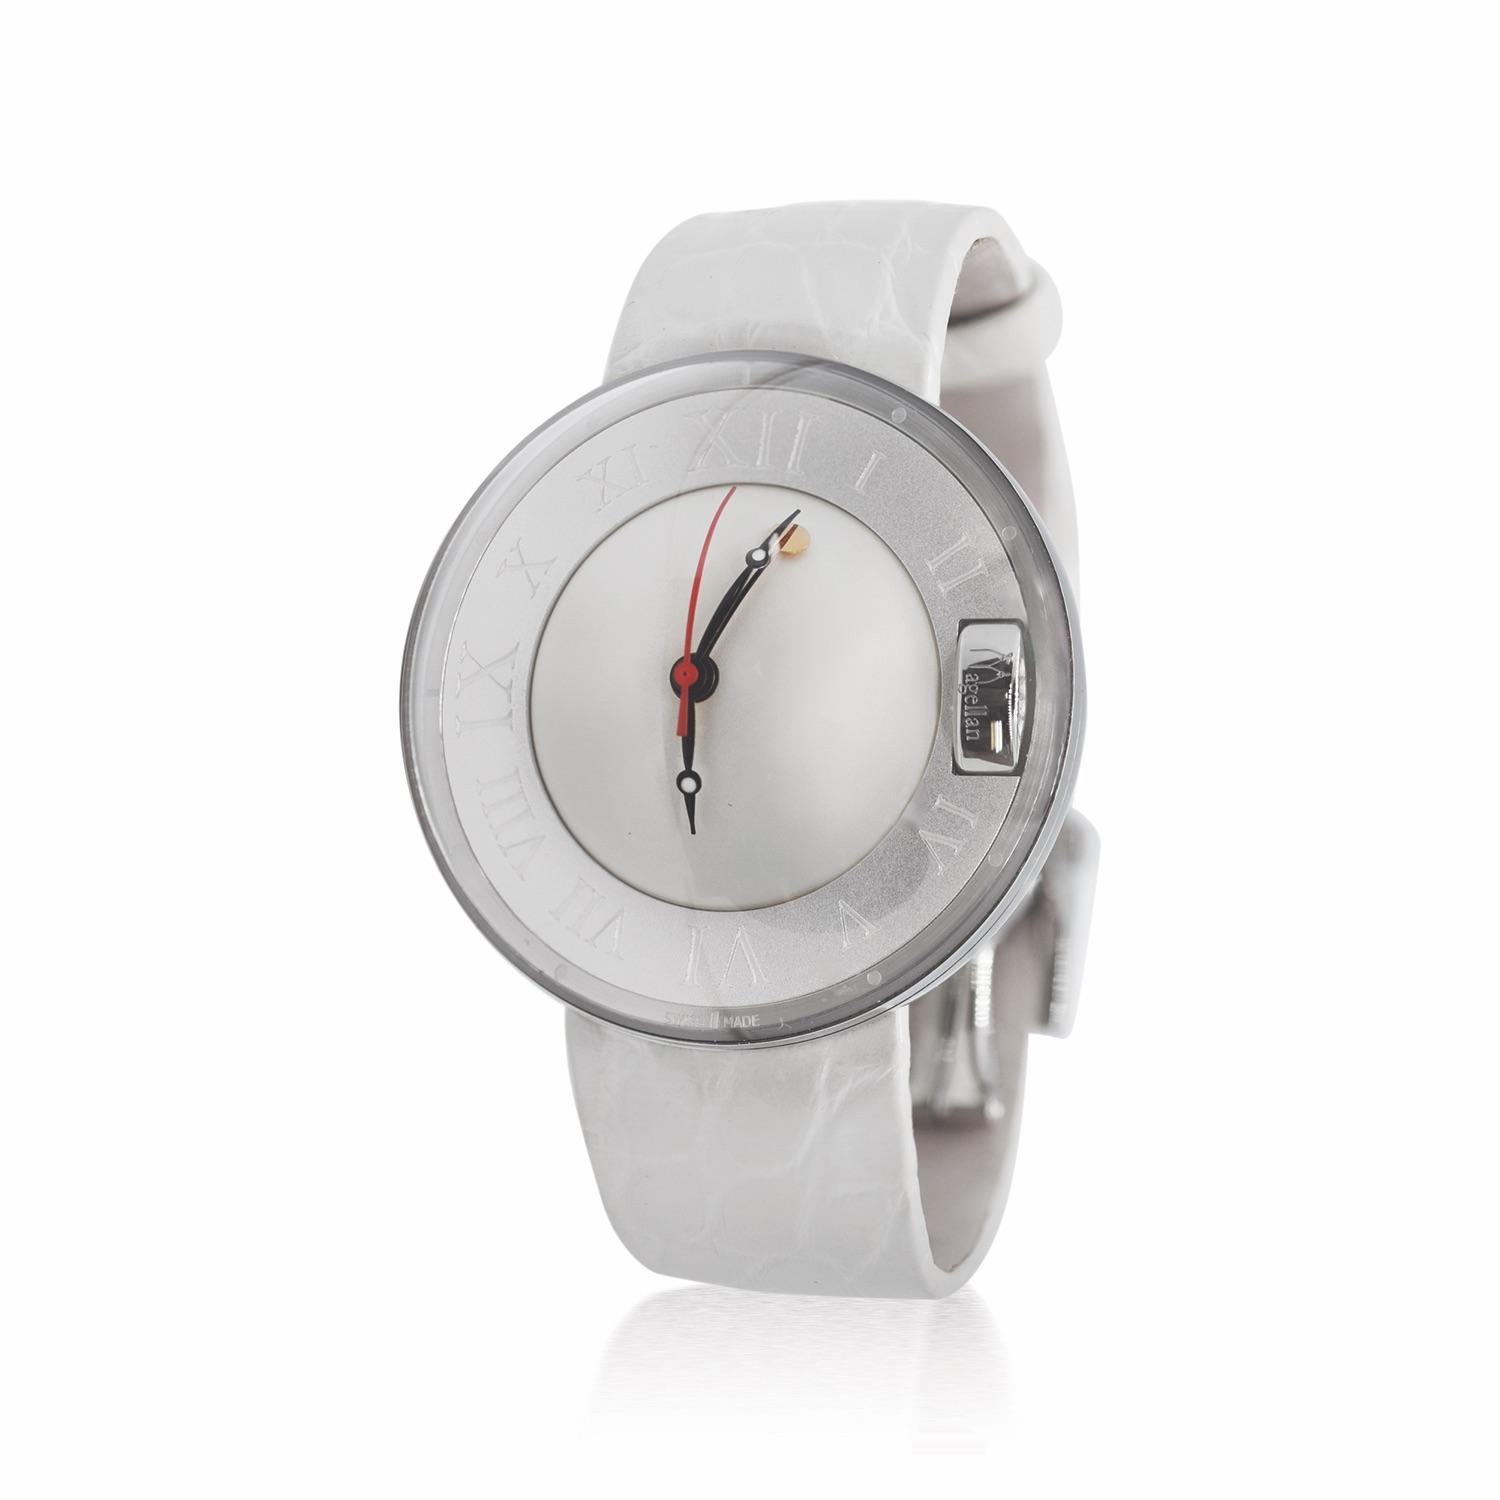 Magellan PEARL TIME watch in polished 316L steel, engraved and screwed back case. Patented integrated crown in polished steel. Unique anti-reflective, hand polished spherical sapphire glass. Pearl Time globe with roman figures. White dial with roman